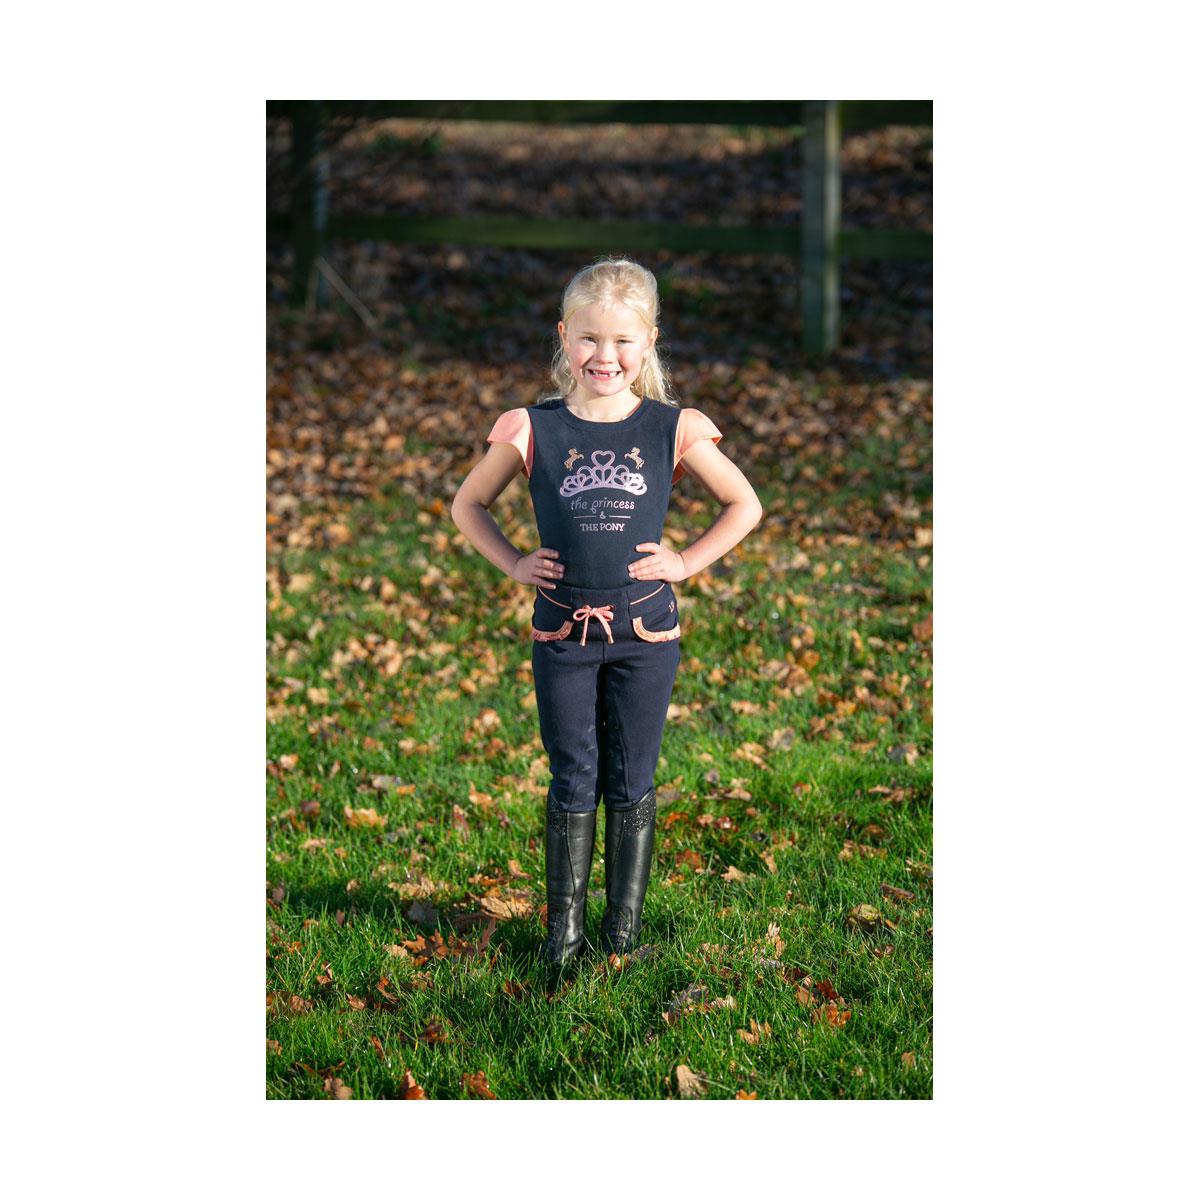 Hy Equestrian The Princess And The Pony Pull On Jodhpurs By Little Rider - Just Horse Riders